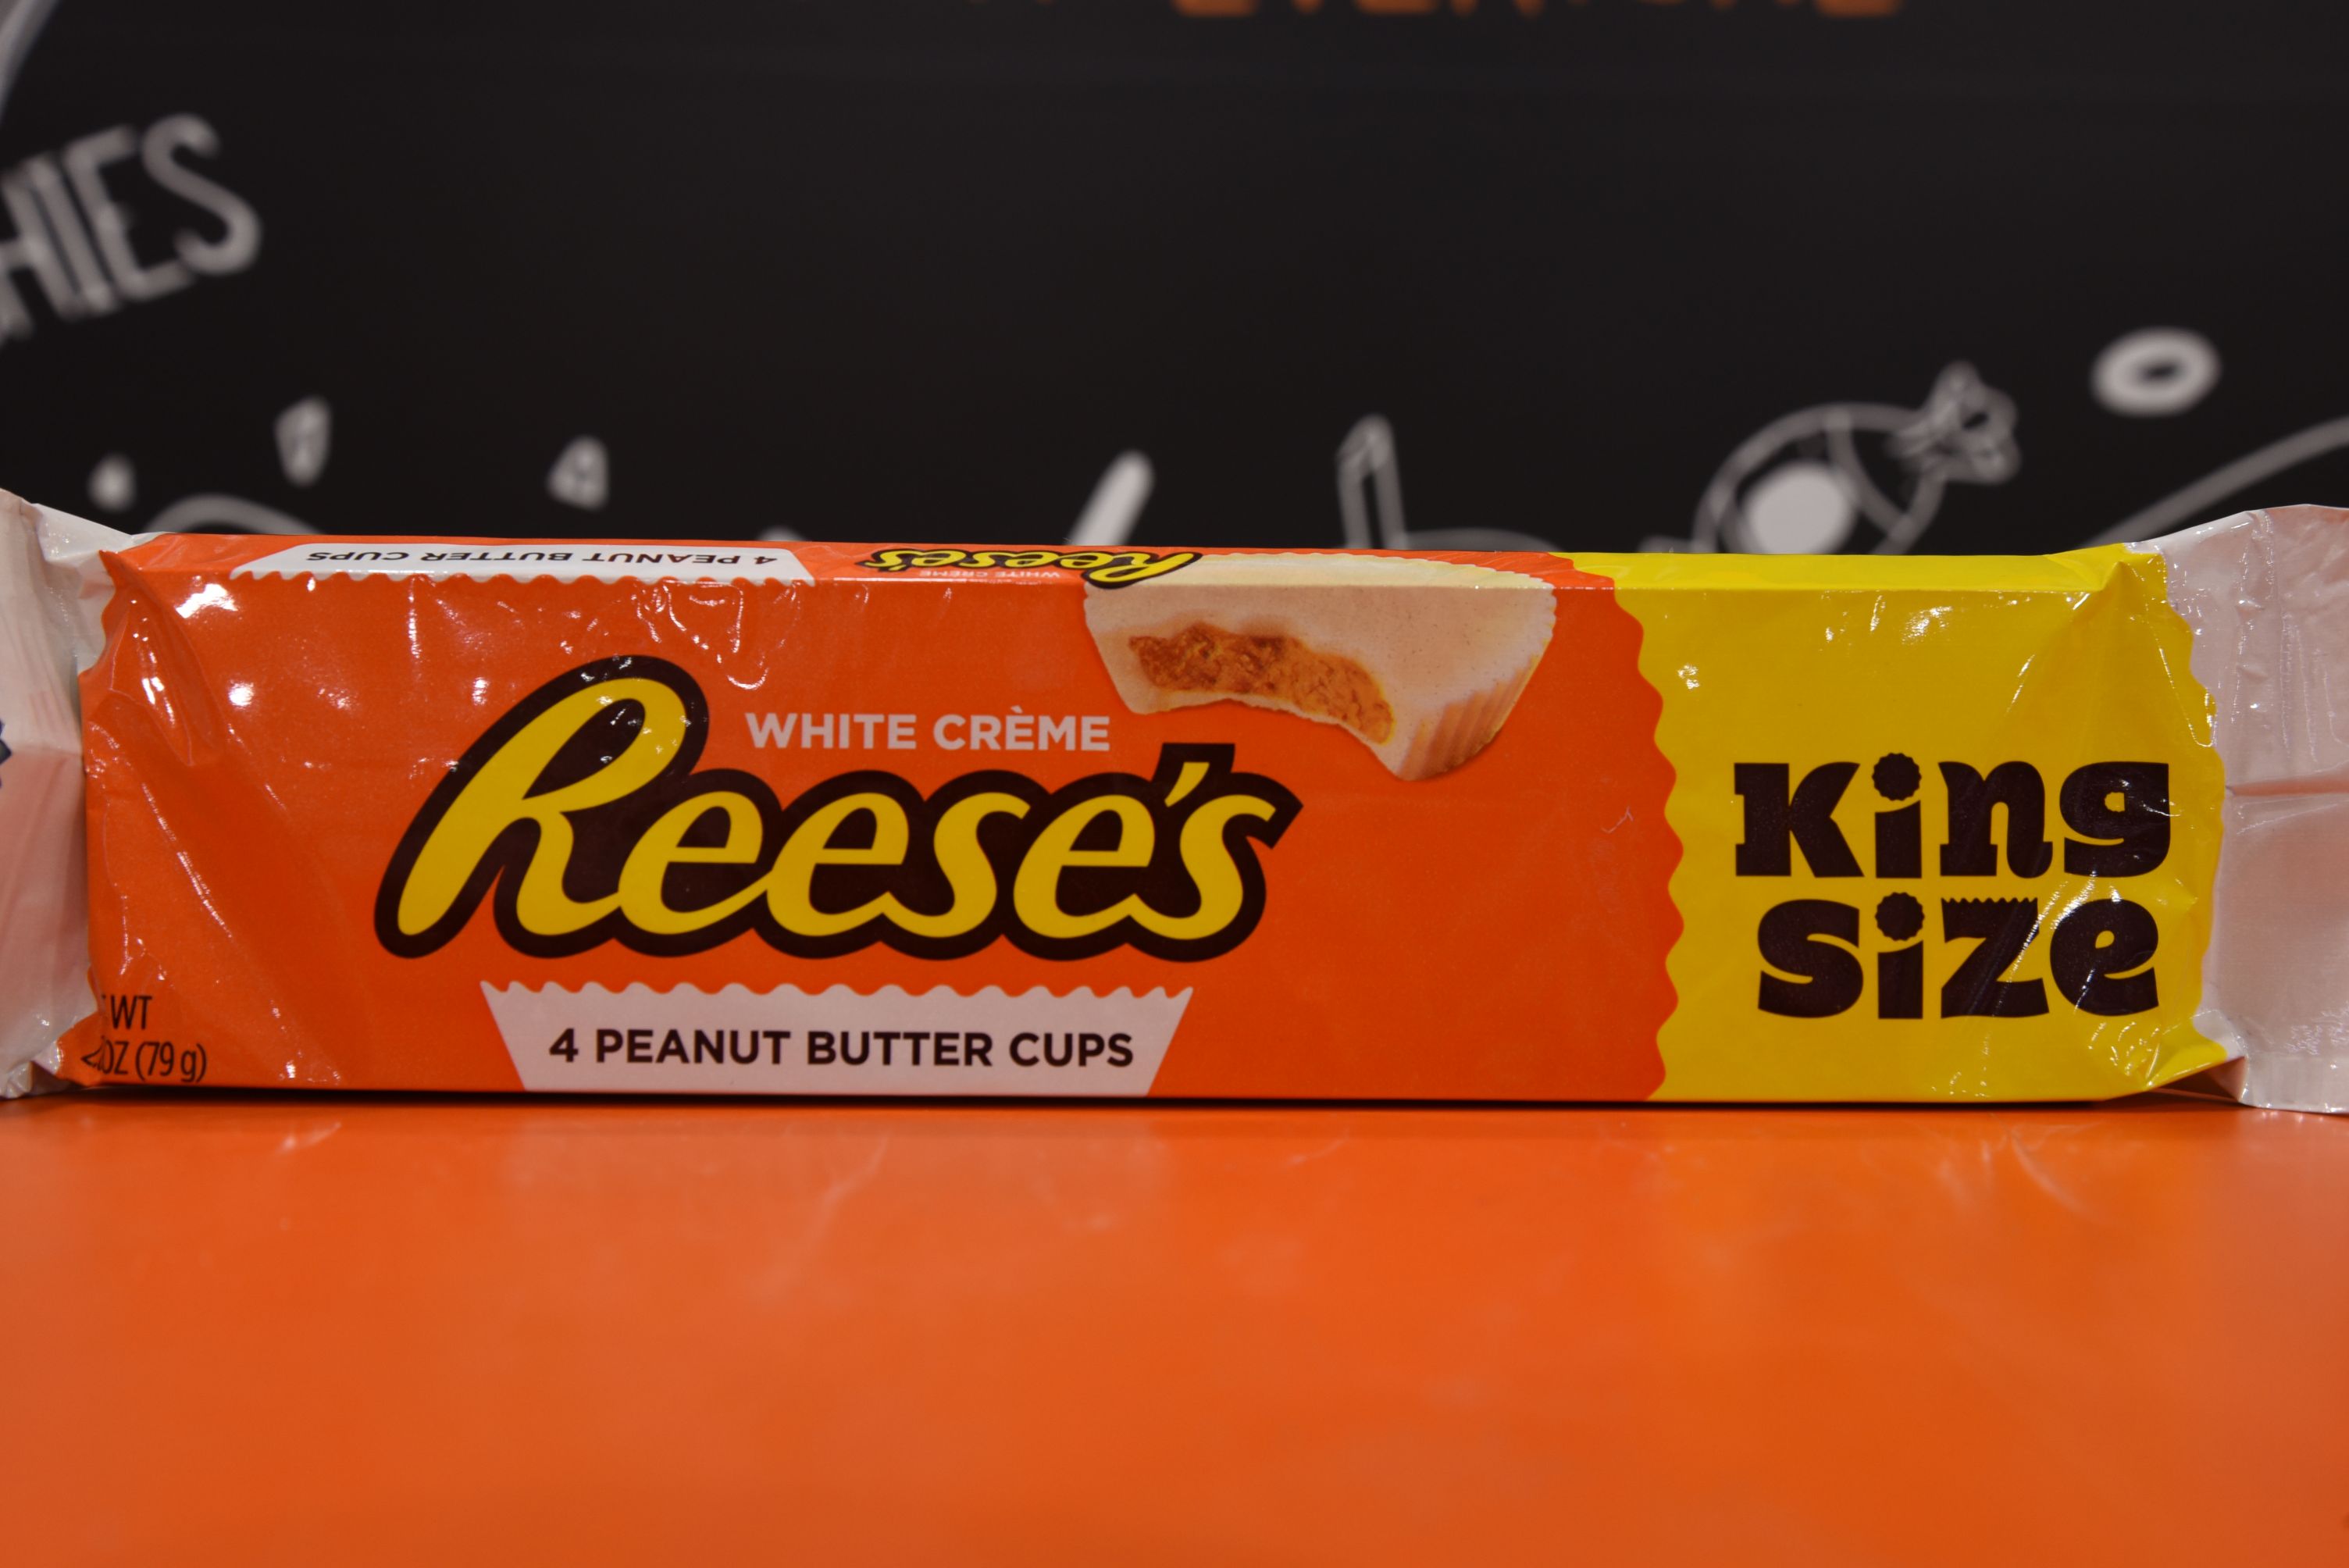 Reese's White Creme 4 Peanut Butter Cups